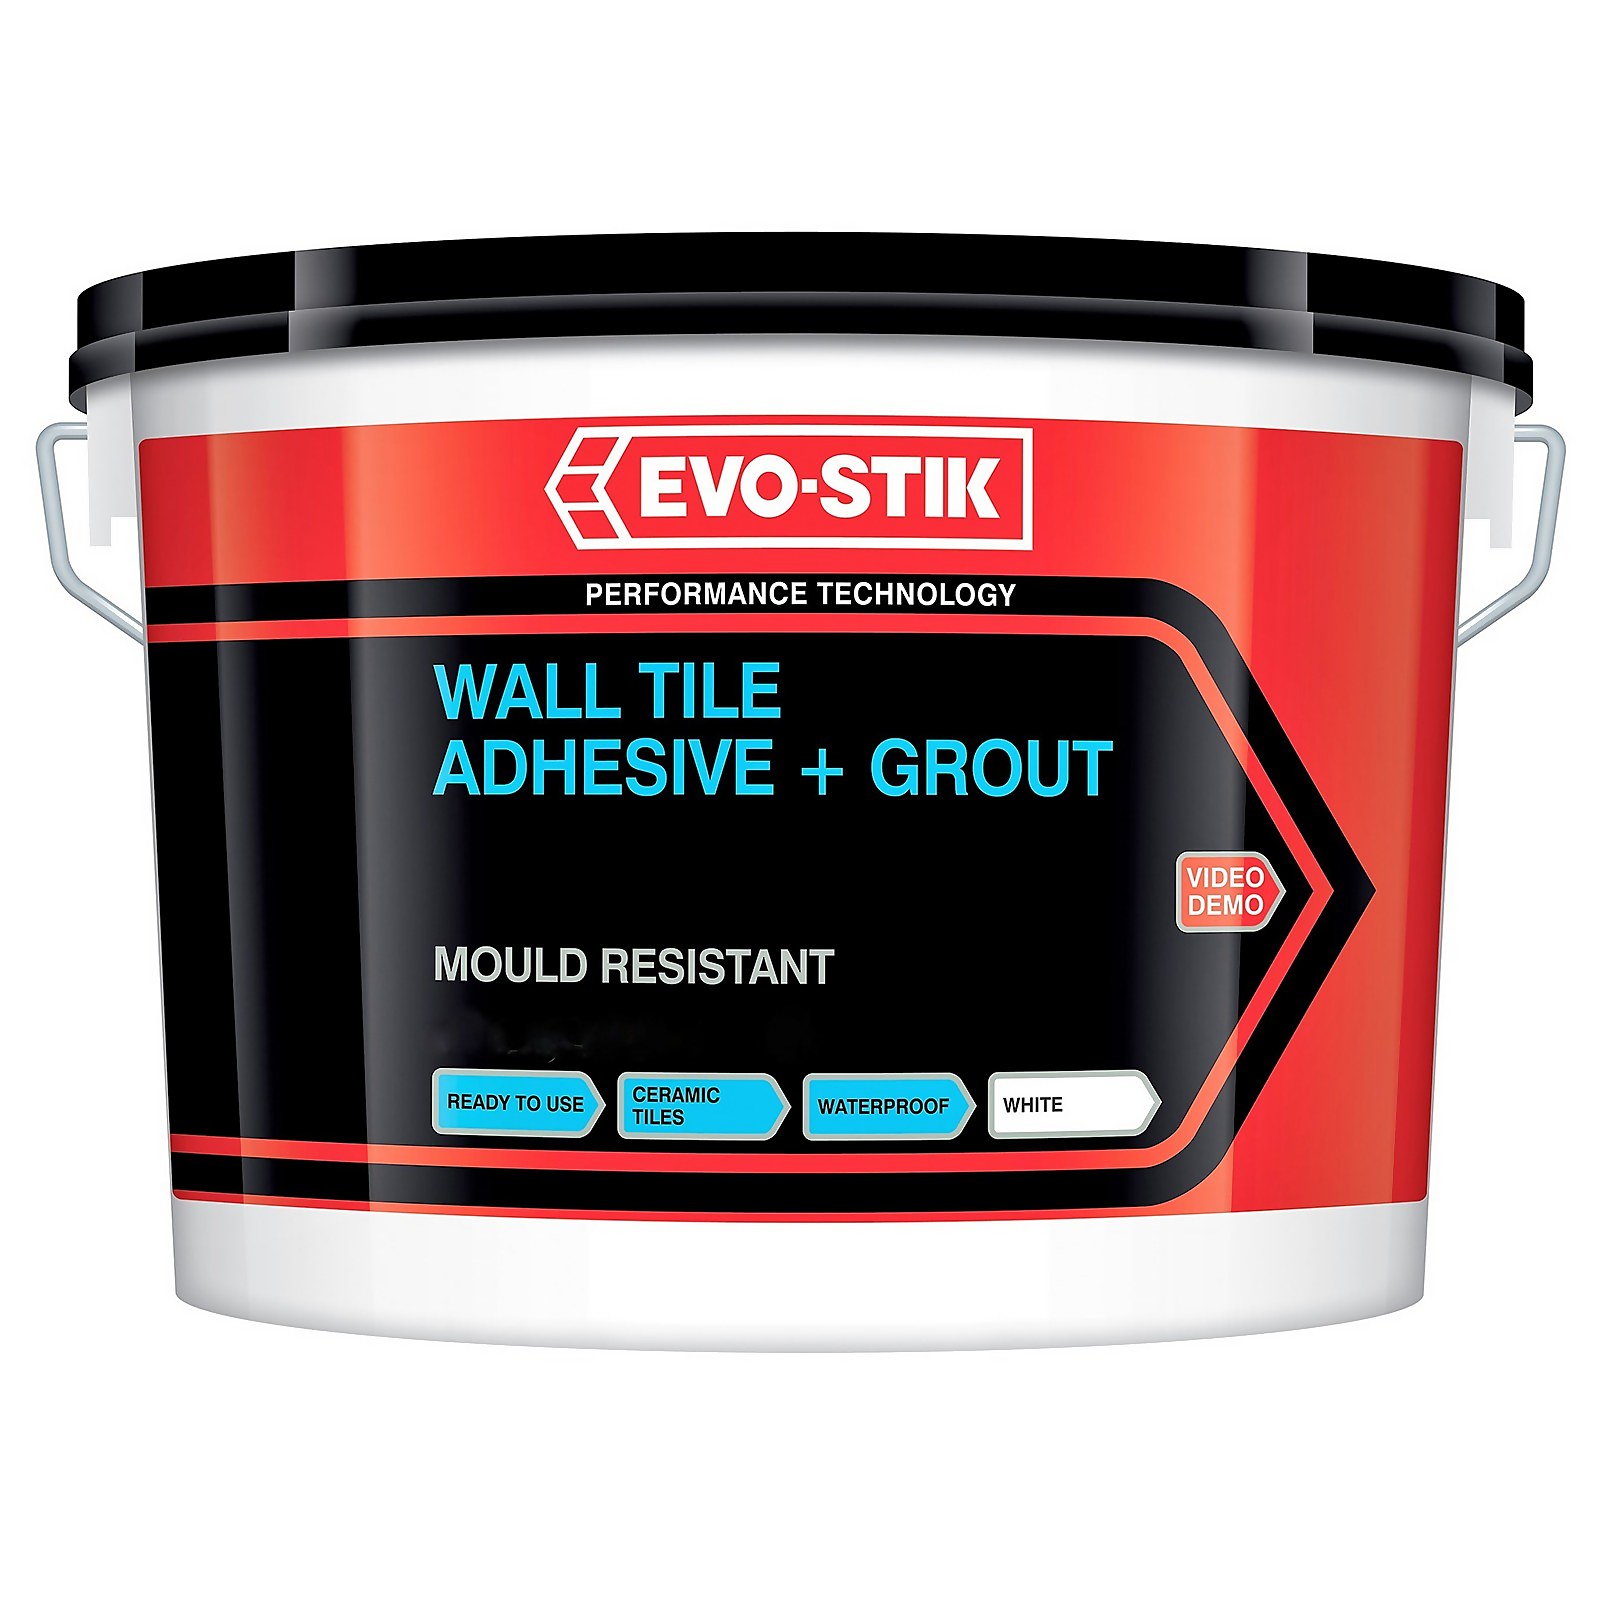 Photo of Evo-stik Mould Resistant Wall Tile Adhesive & Grout Economy